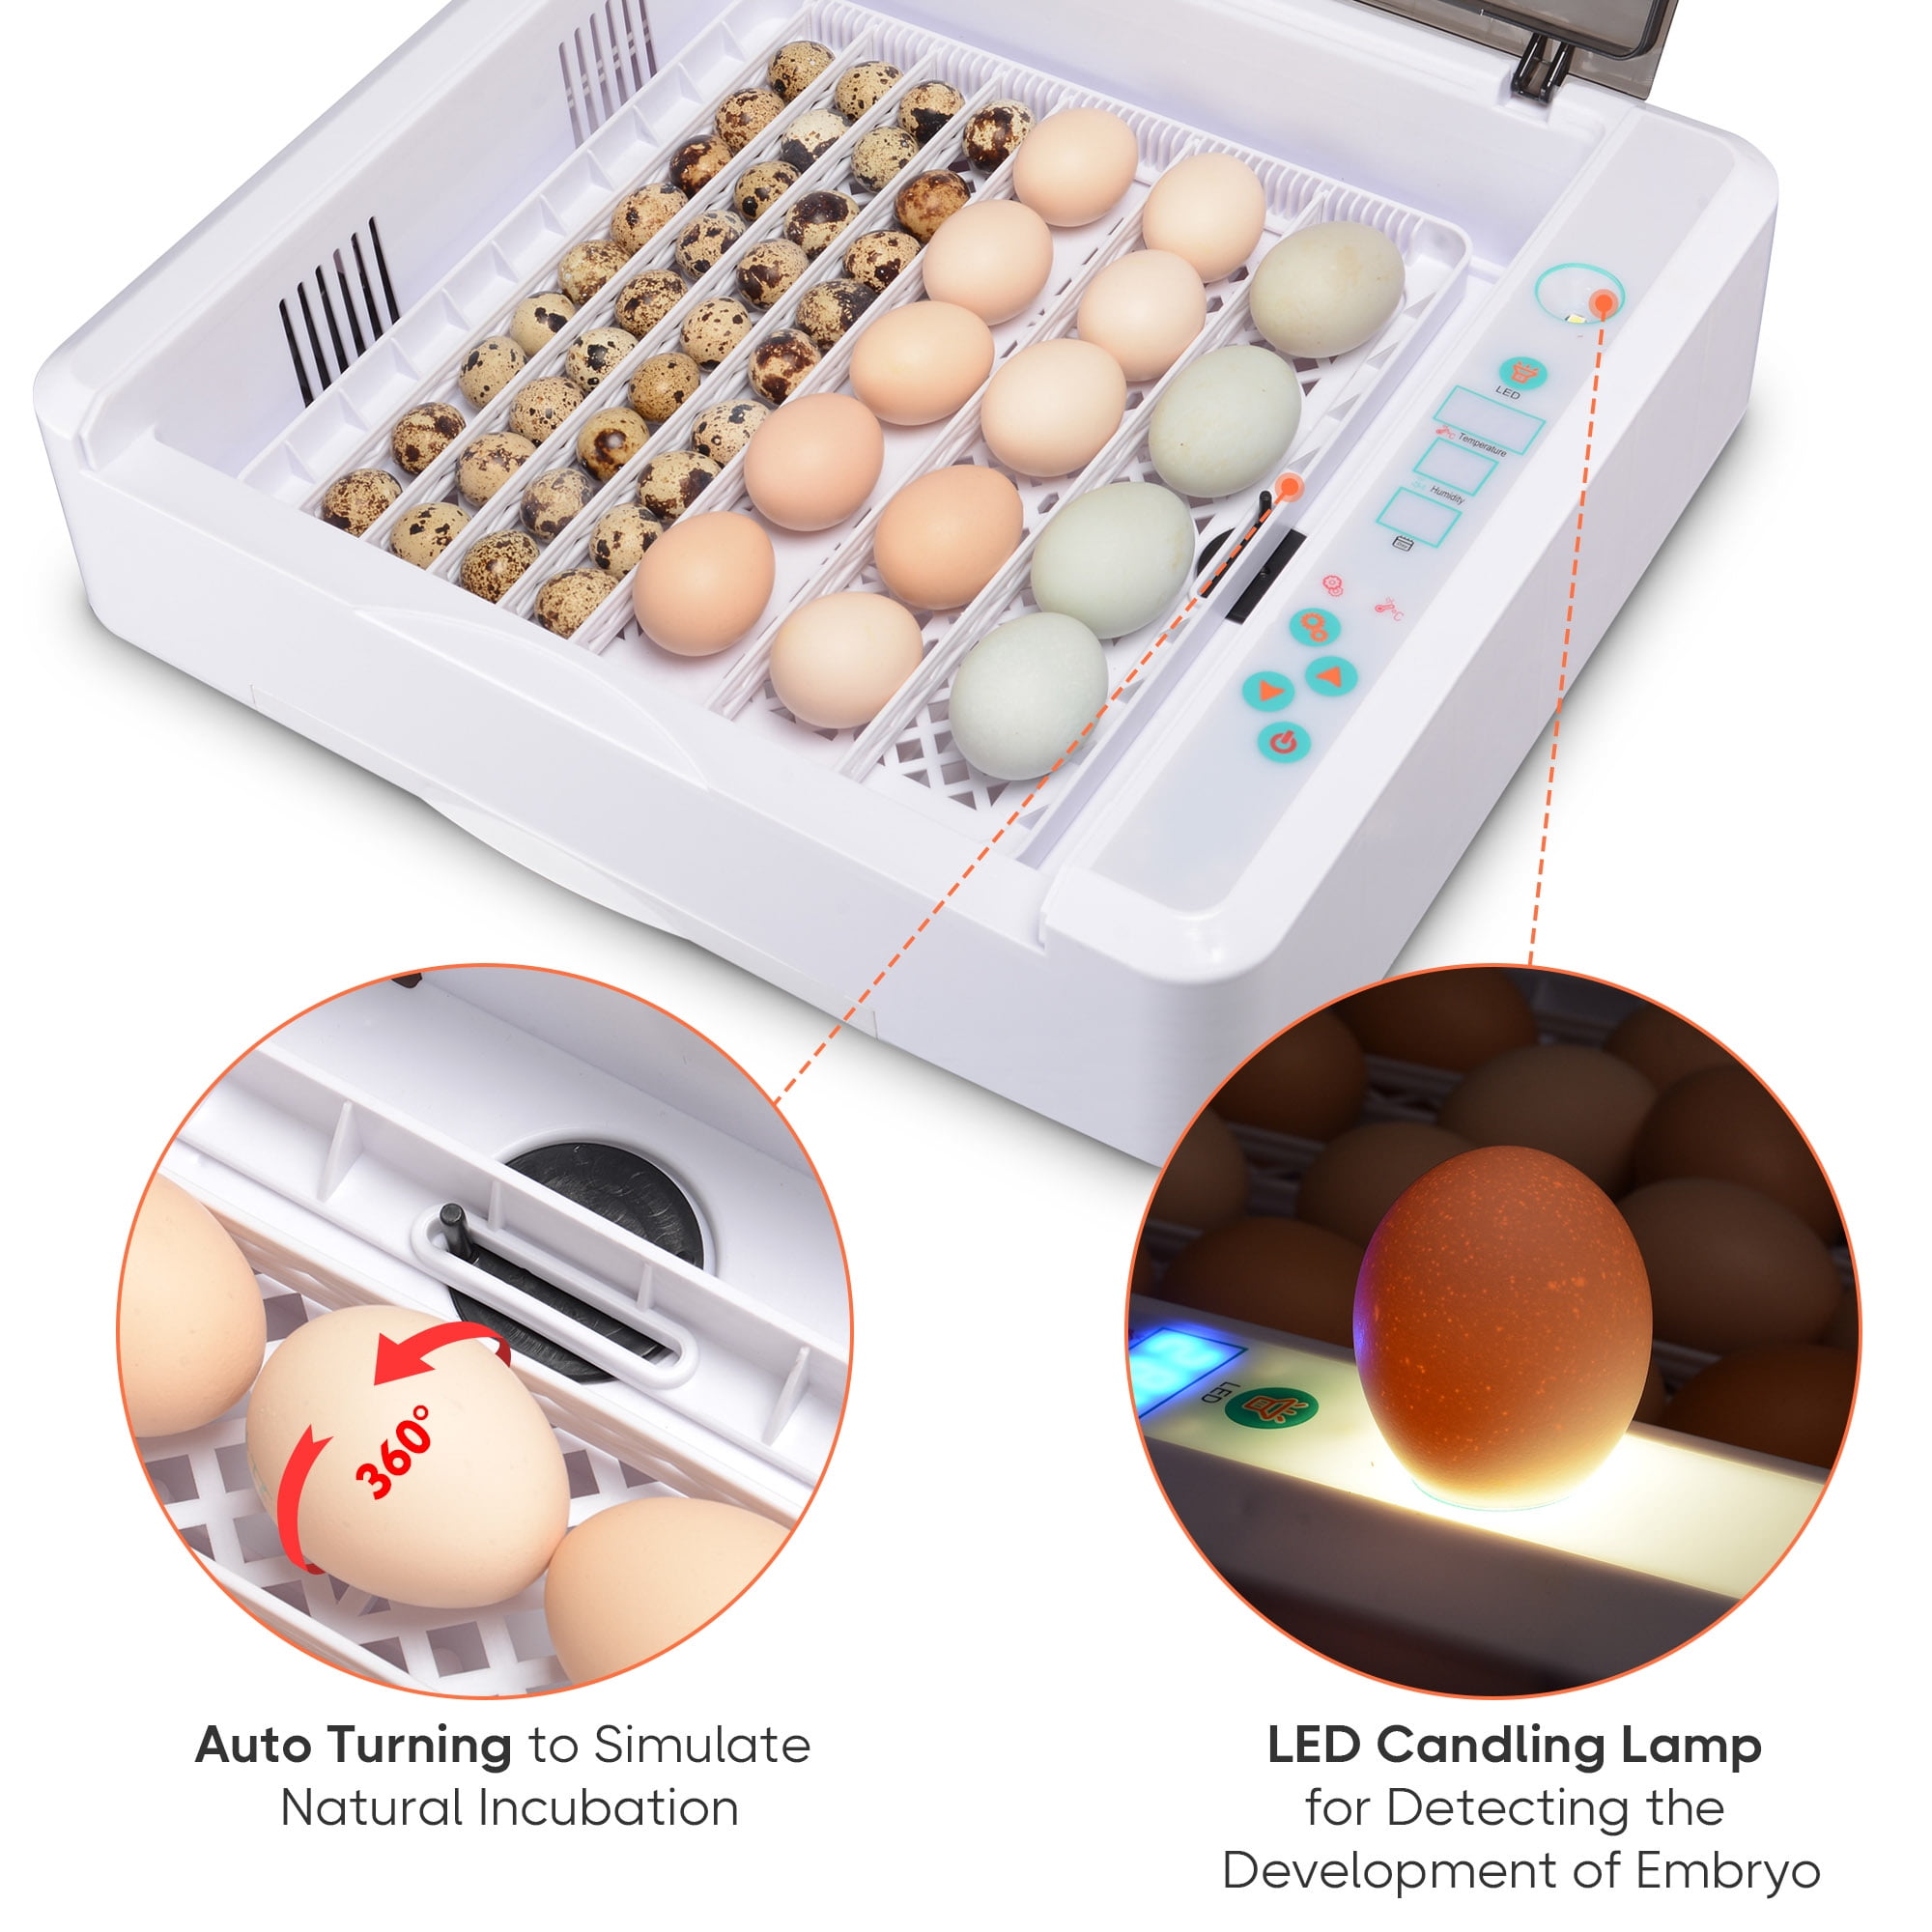 Buy Digital Fully Automatic Egg Incubator 36-120 Eggs Poultry